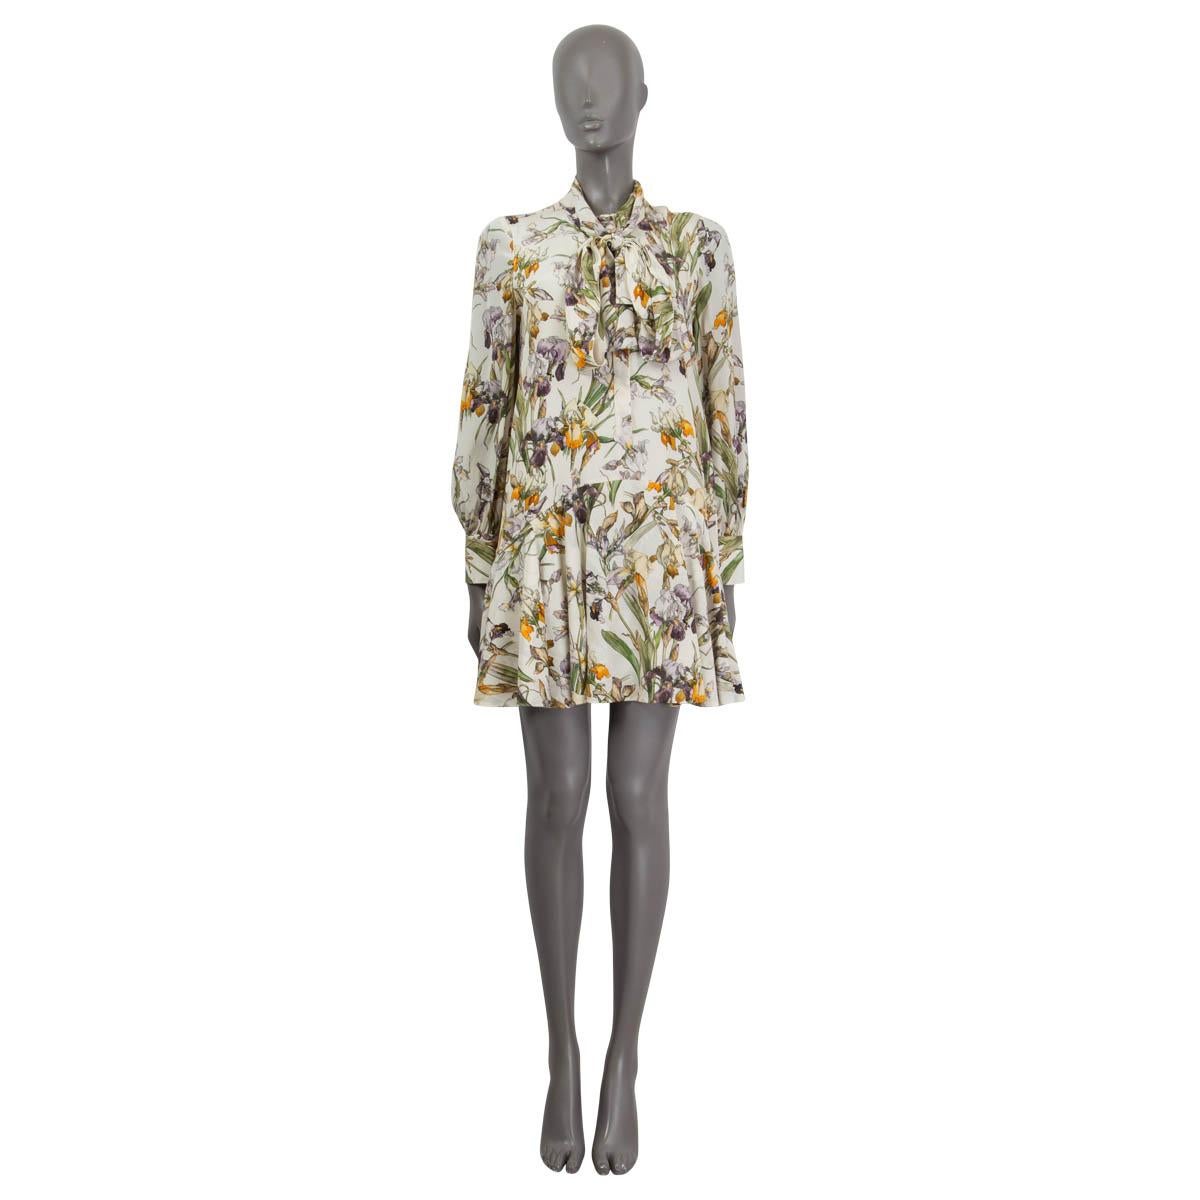 100% authentic Alexander McQueen's silk mini floral dress in off-white and multicolor silk (100%) with a flared hem, pussy-bow tie, long sleeves and buttoned cuffs. Closes with button fastening in the front. Lined in off-white silk (100%). Has a